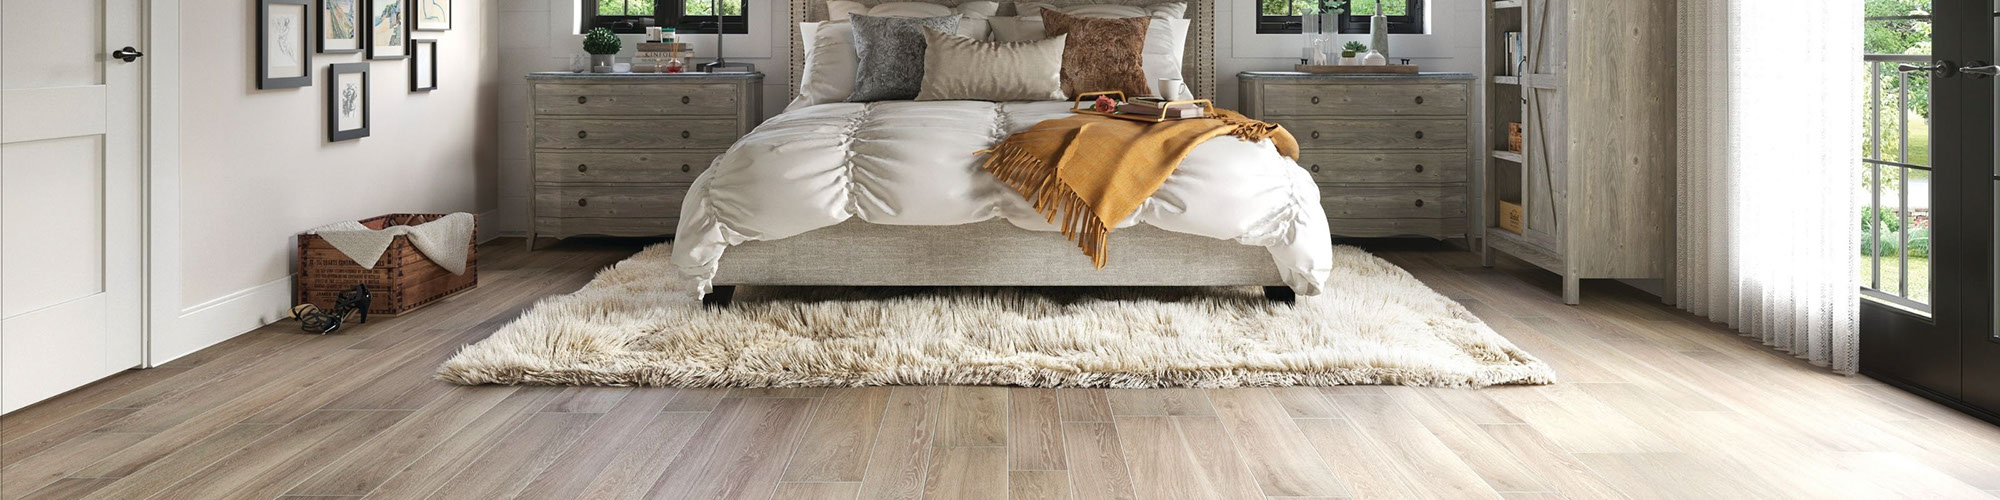 Modern farmhouse bedroom with floor tile that looks like wood, beige fuzzy rug under bed with white comforter & pillows, and gray wood nightstands.